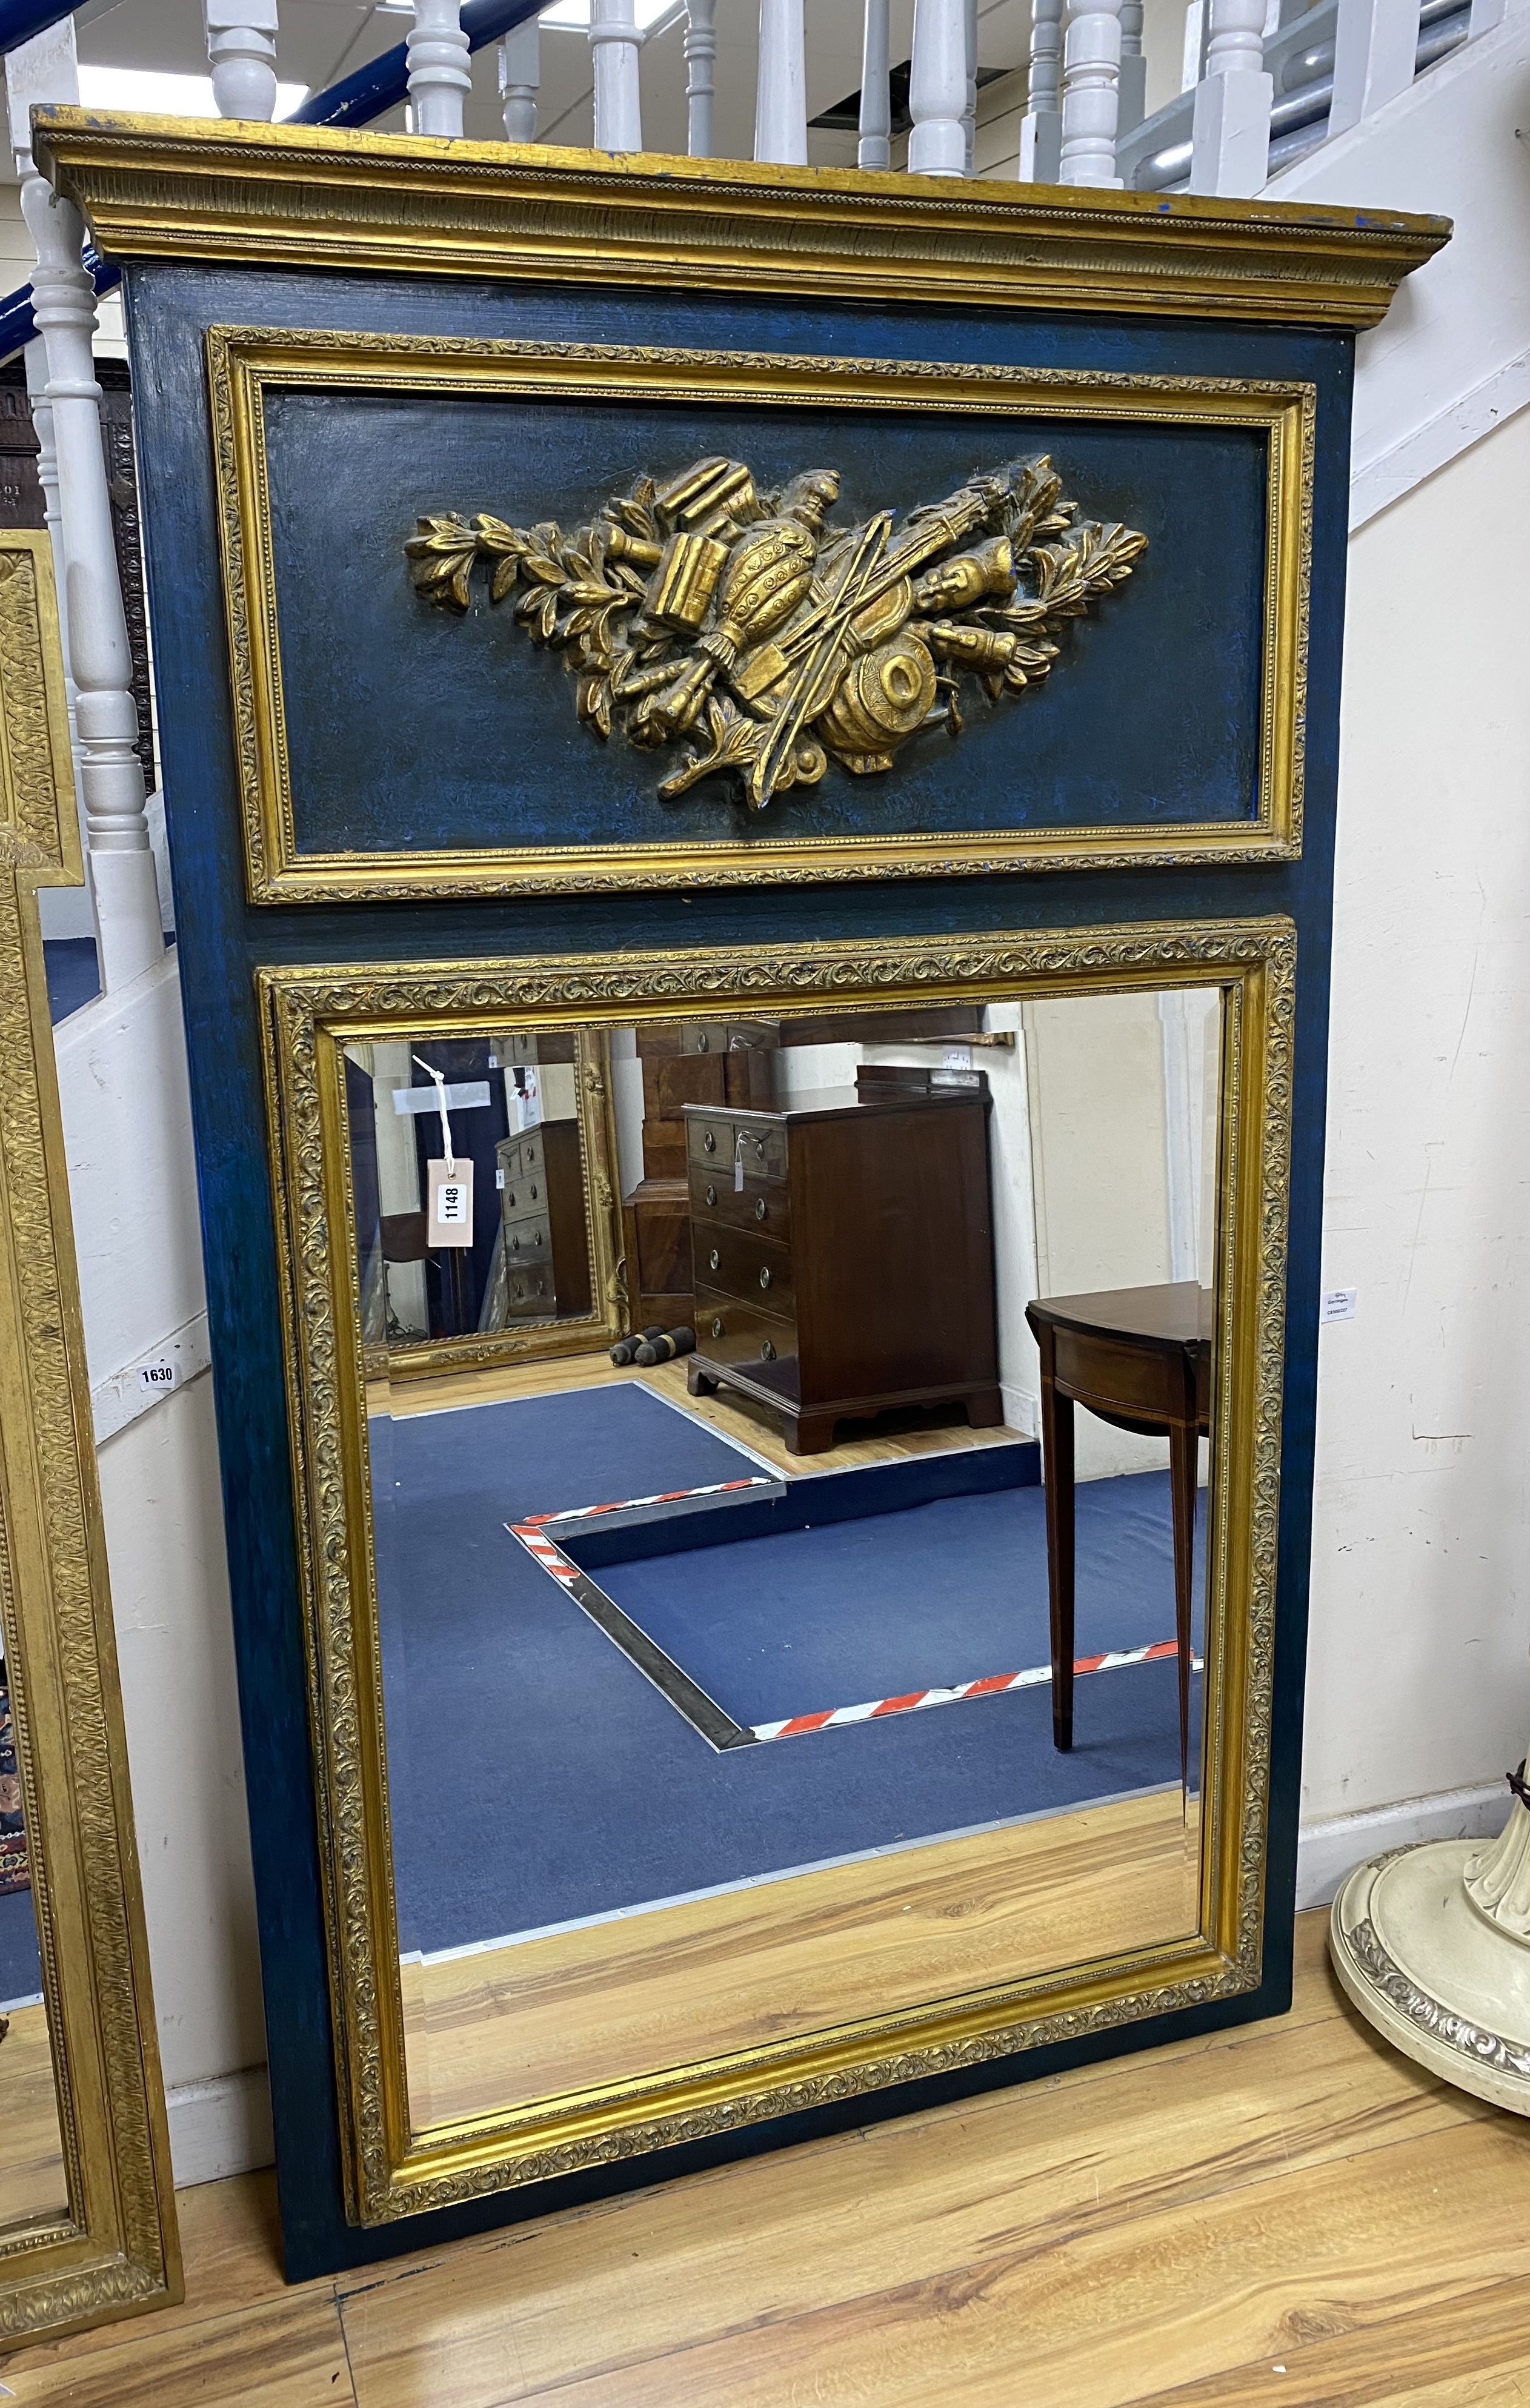 A 19th century French overmantel gilt and gesso mirror with musical themed emblem over on blue background, width 114cm, height 172cm